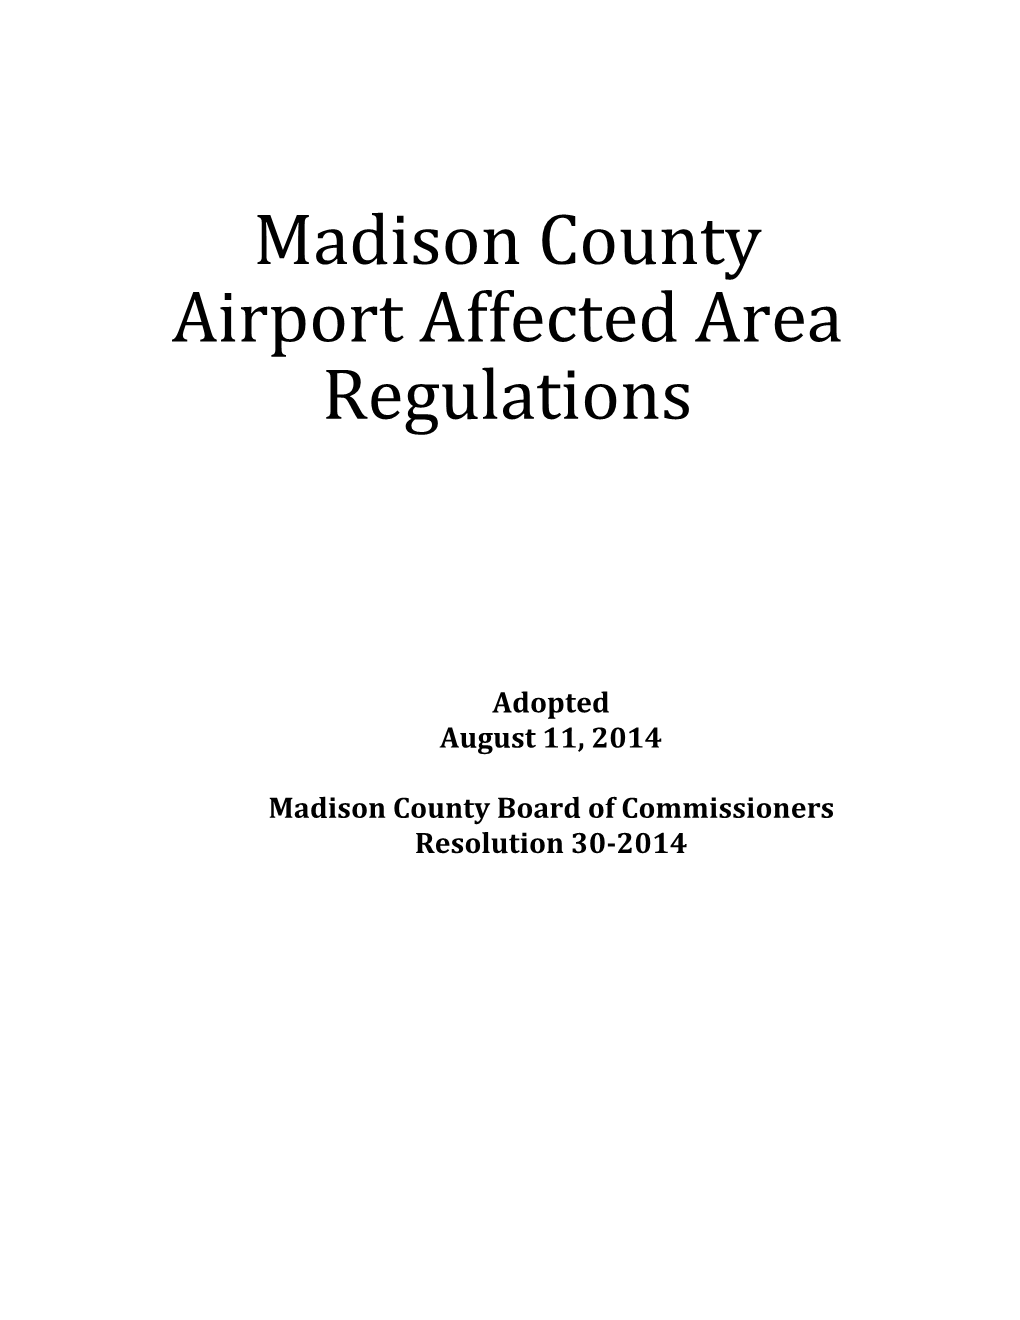 Airport Affected Area Regulations (PDF)